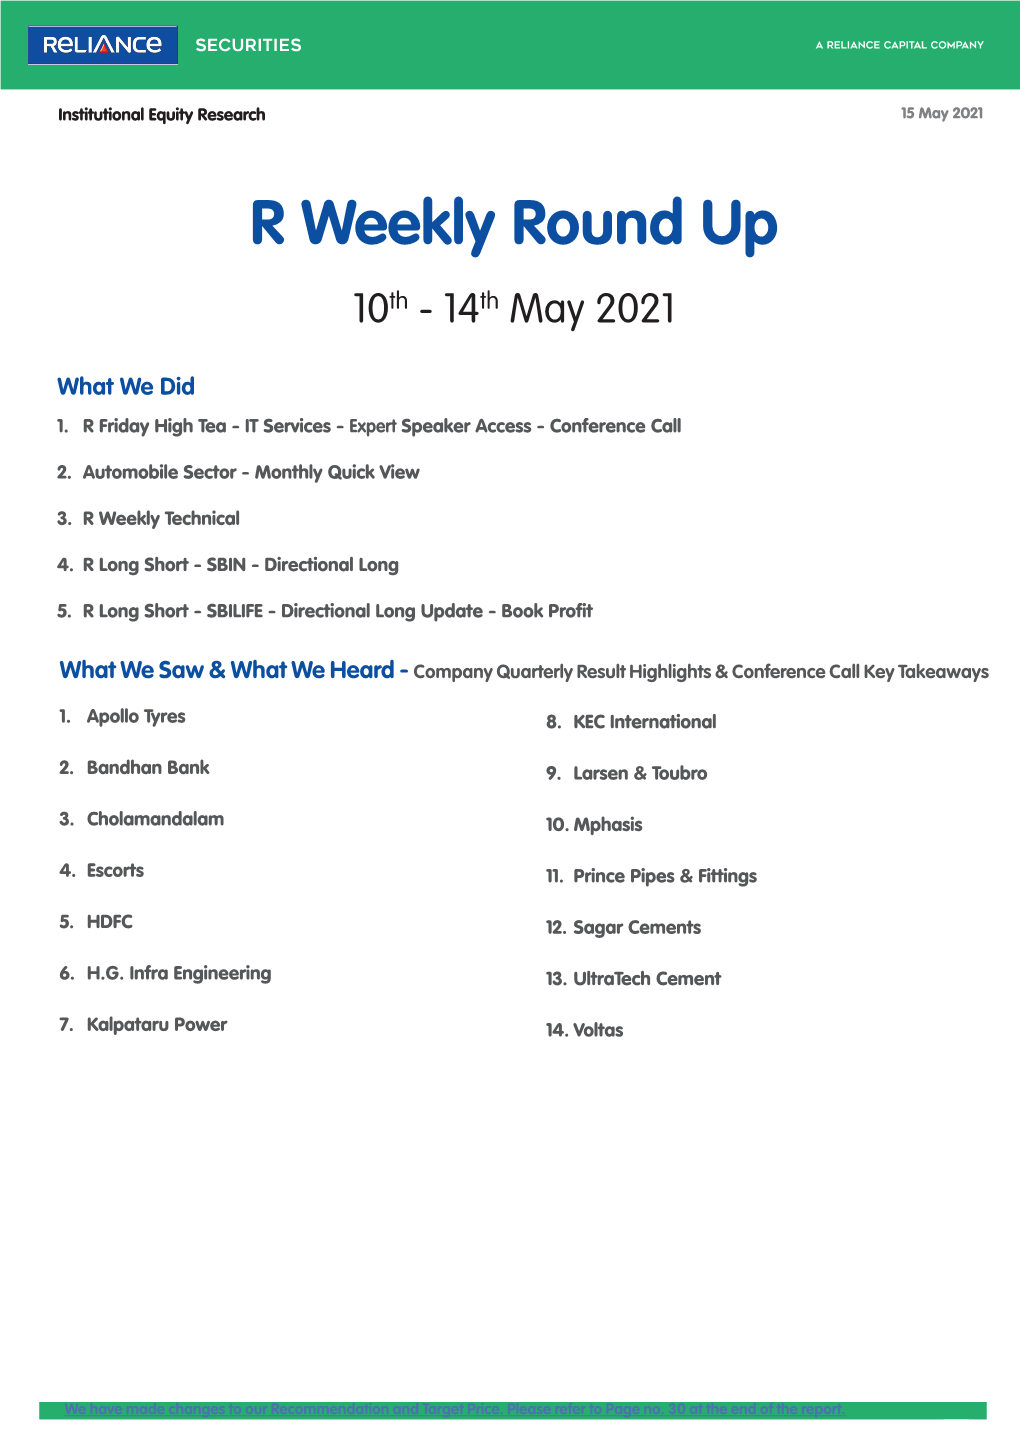 R Weekly Round up 10Th - 14Th May 2021